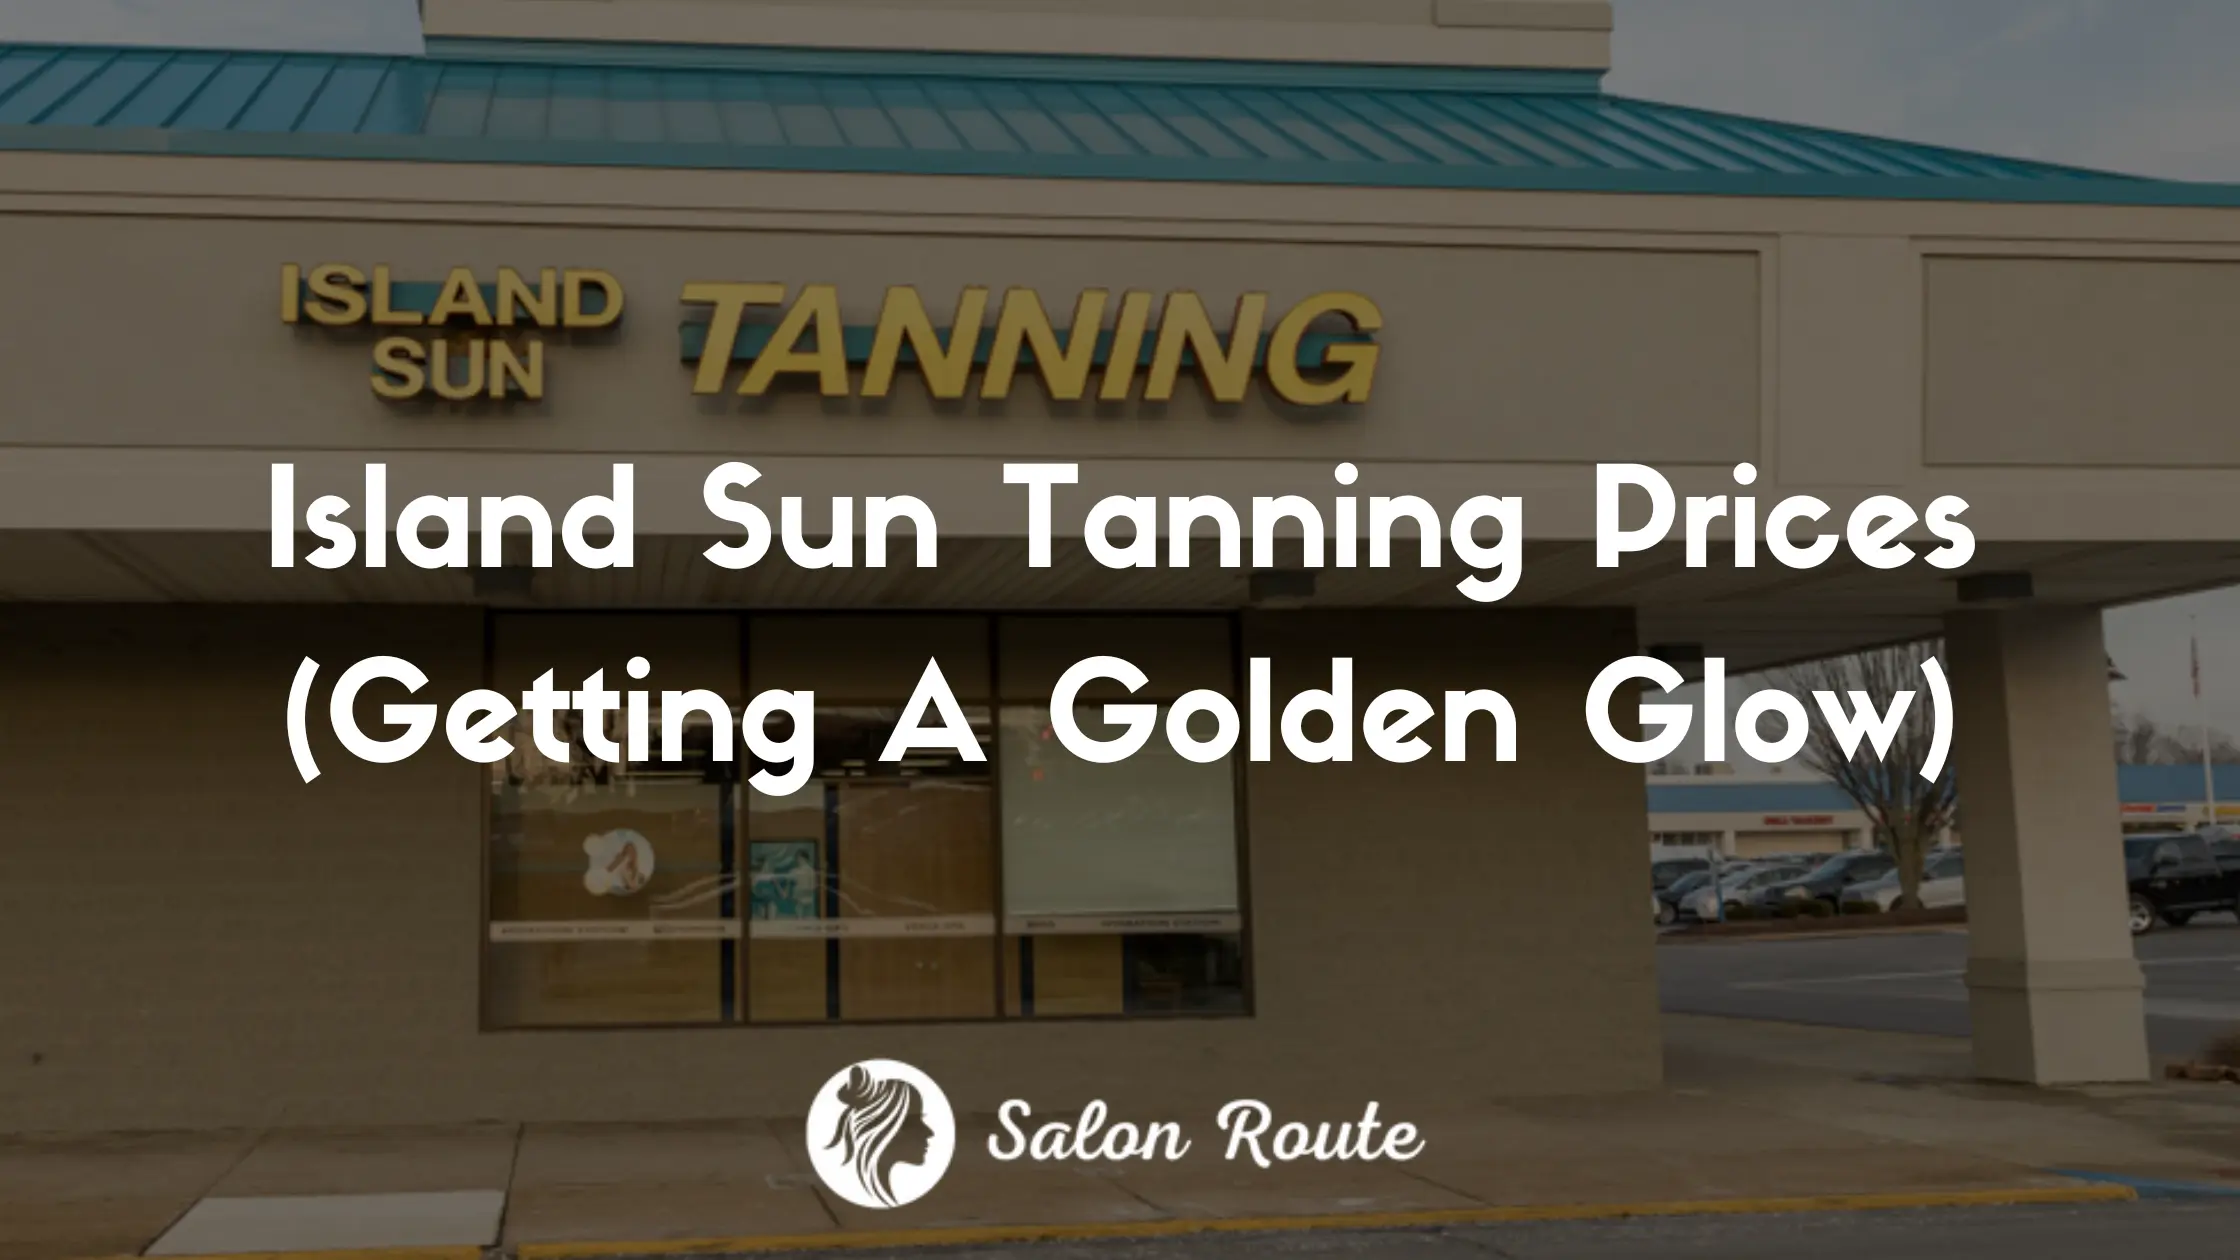 Island Sun Tanning Prices (Getting A Golden Glow)